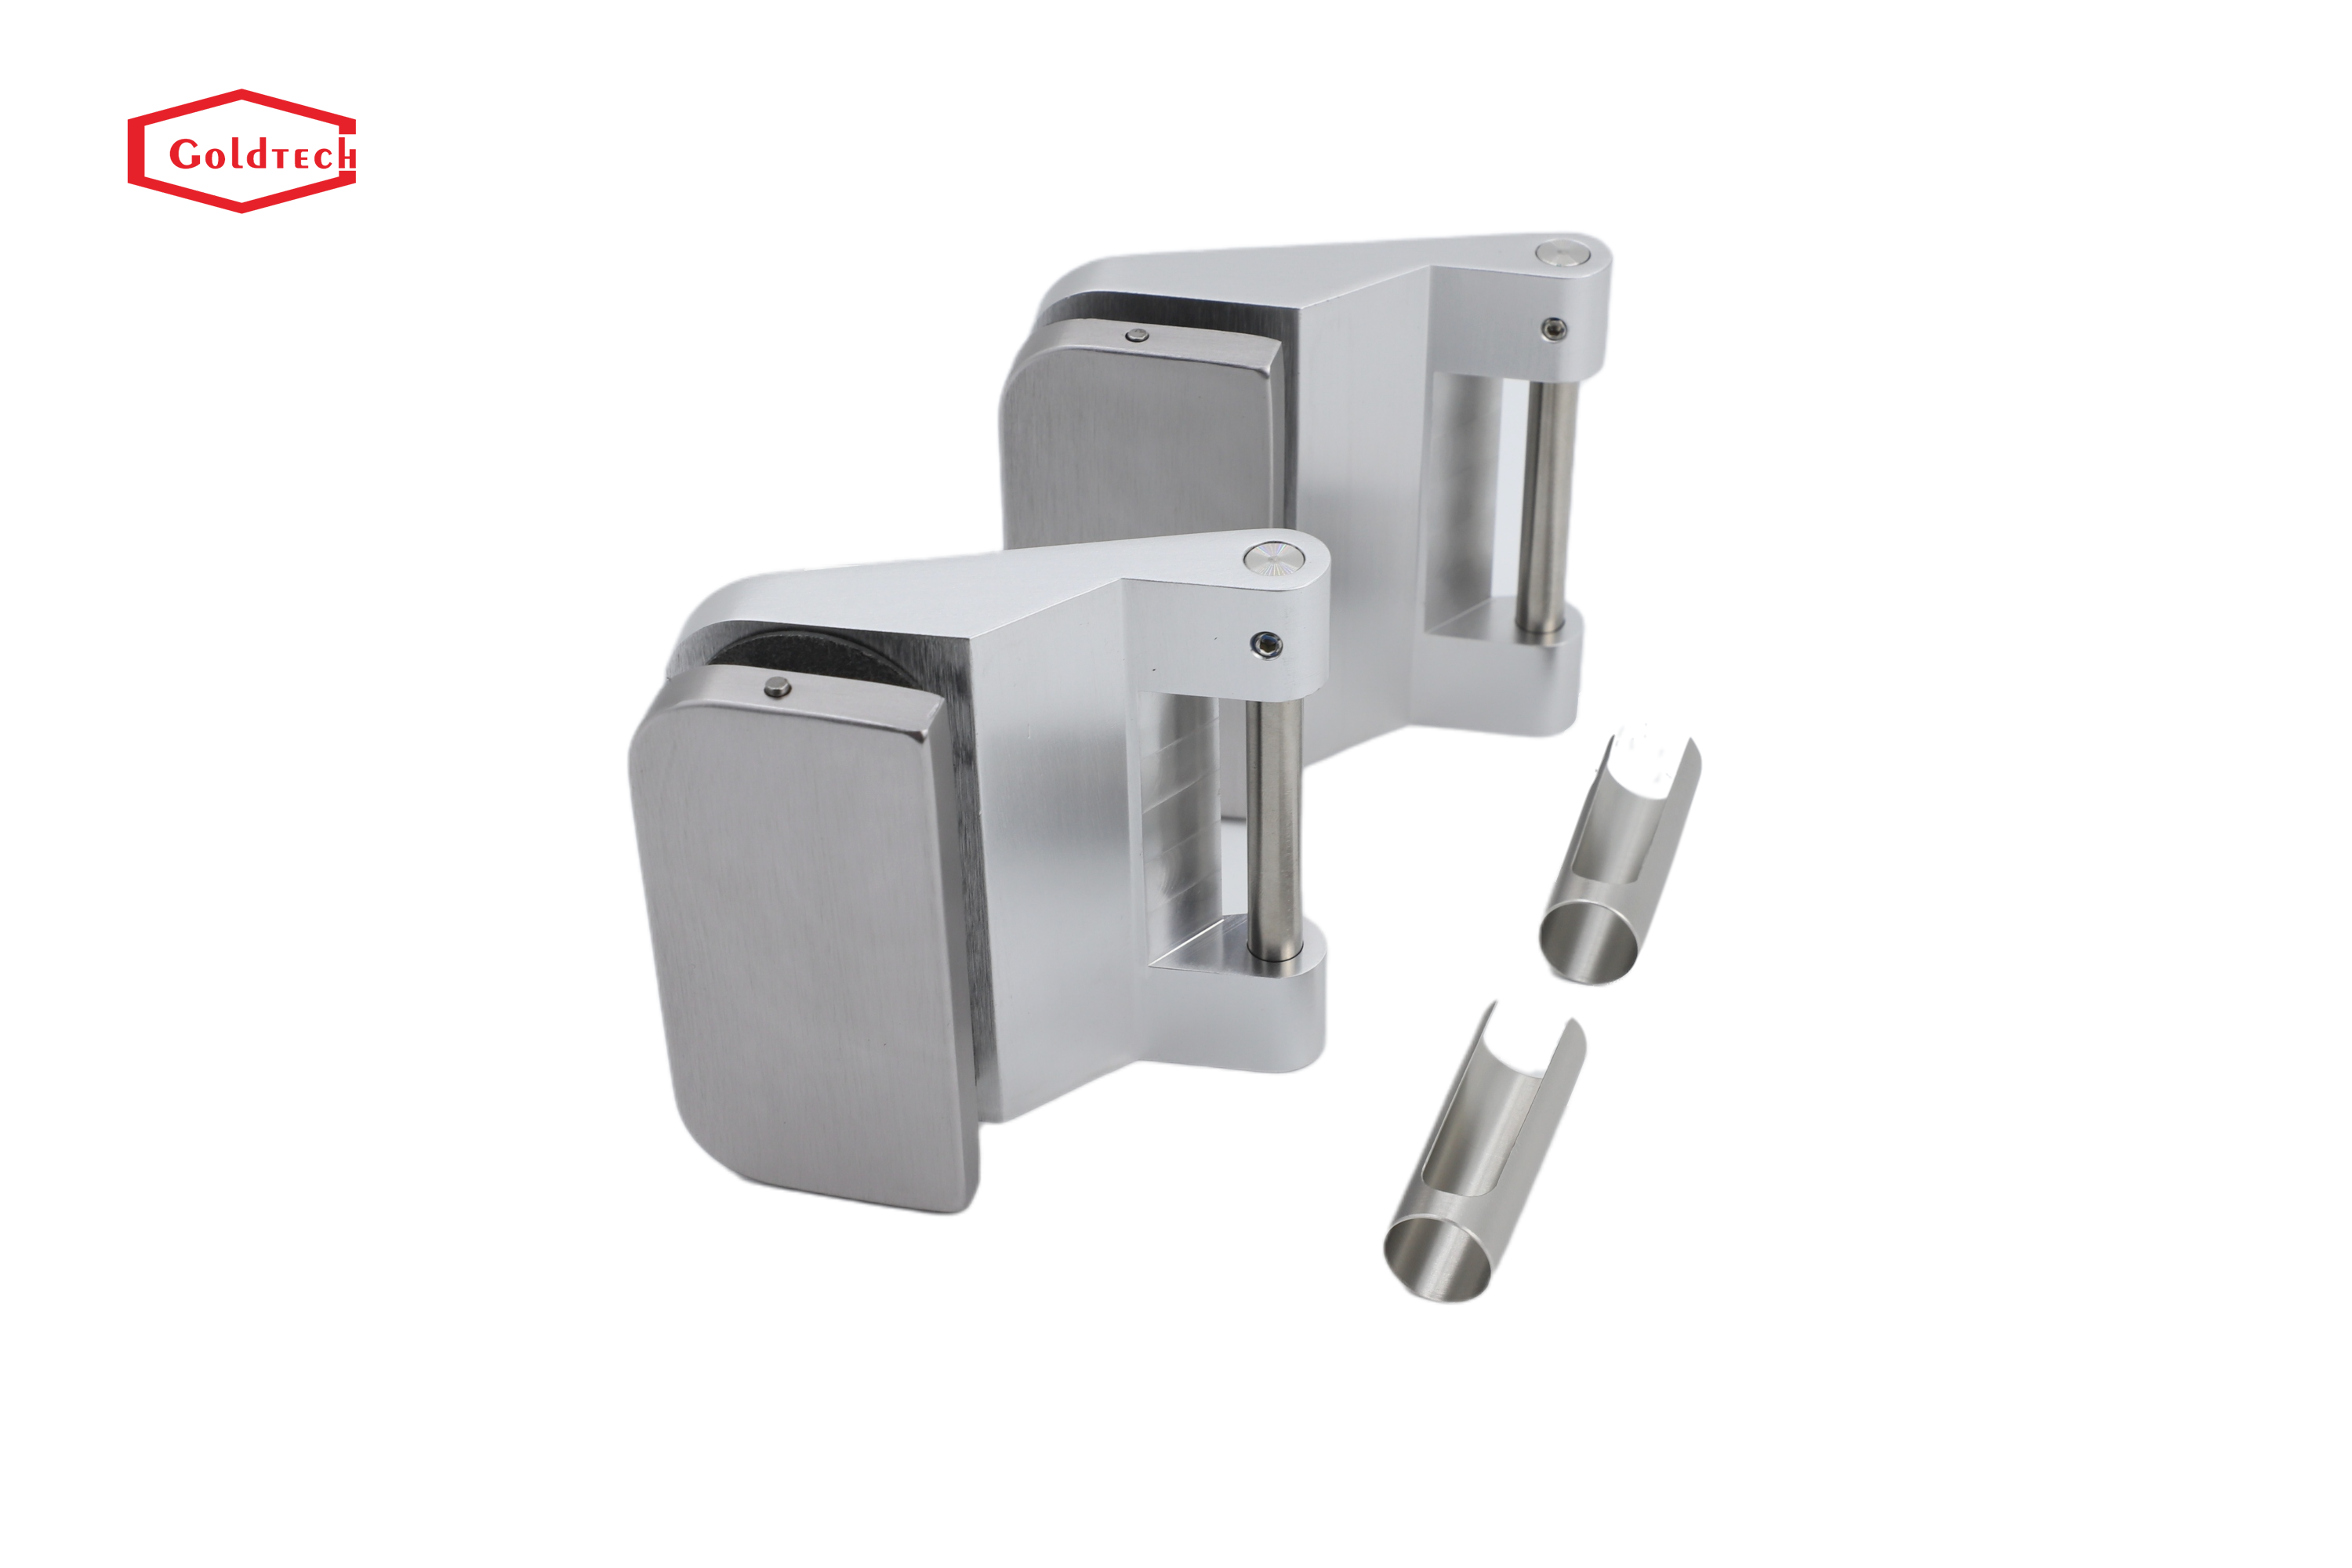 Choosing the Right Glass Shower Door Hinges for Your Bathroom